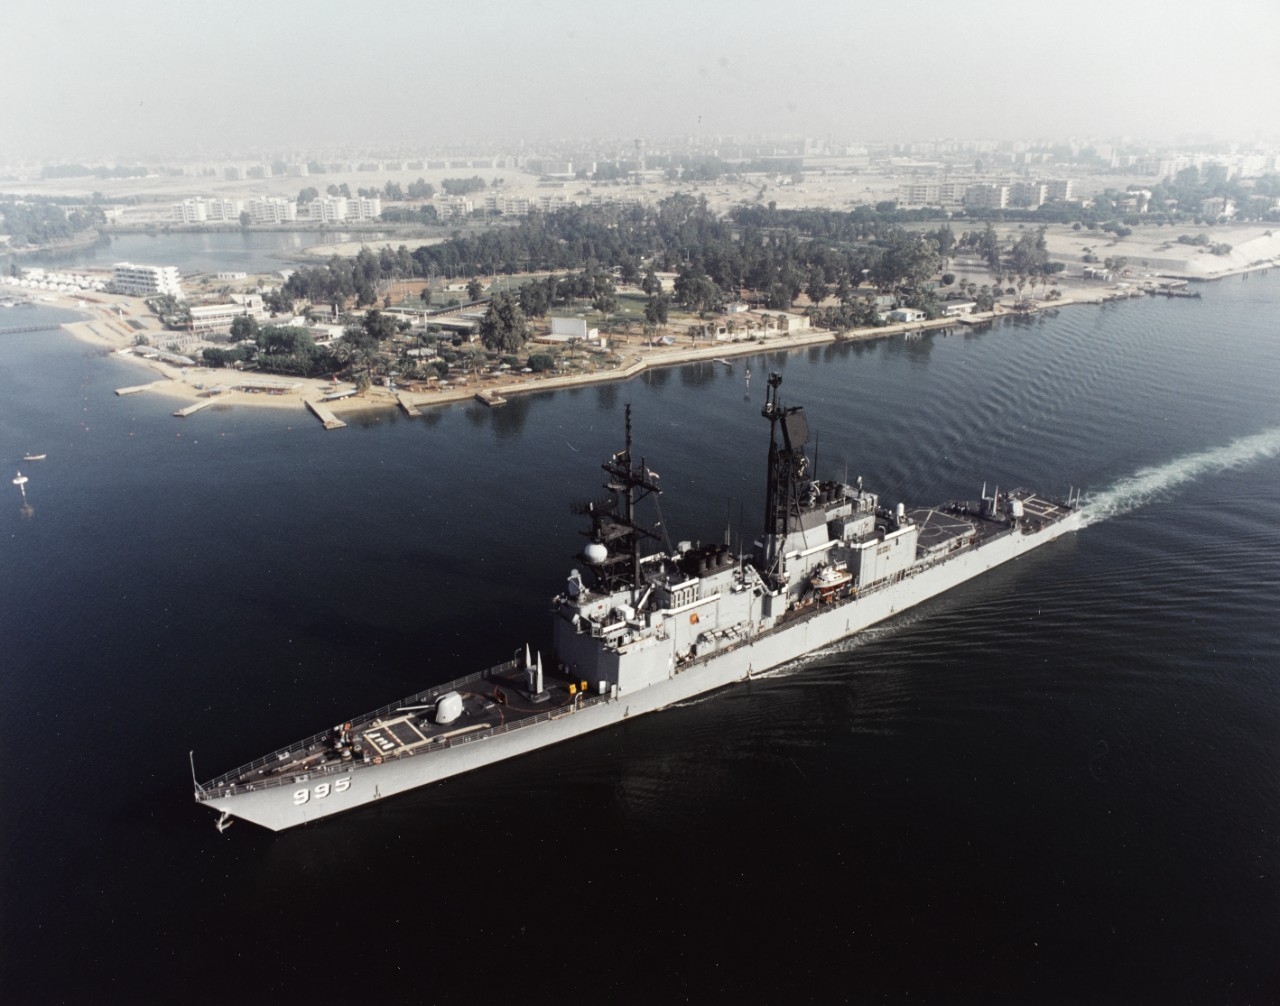 Color, aerial photograph of USS Scott (DG-995) in the Suez Canal. The background shows a sandy shoreline with buildings and trees farther inland. 